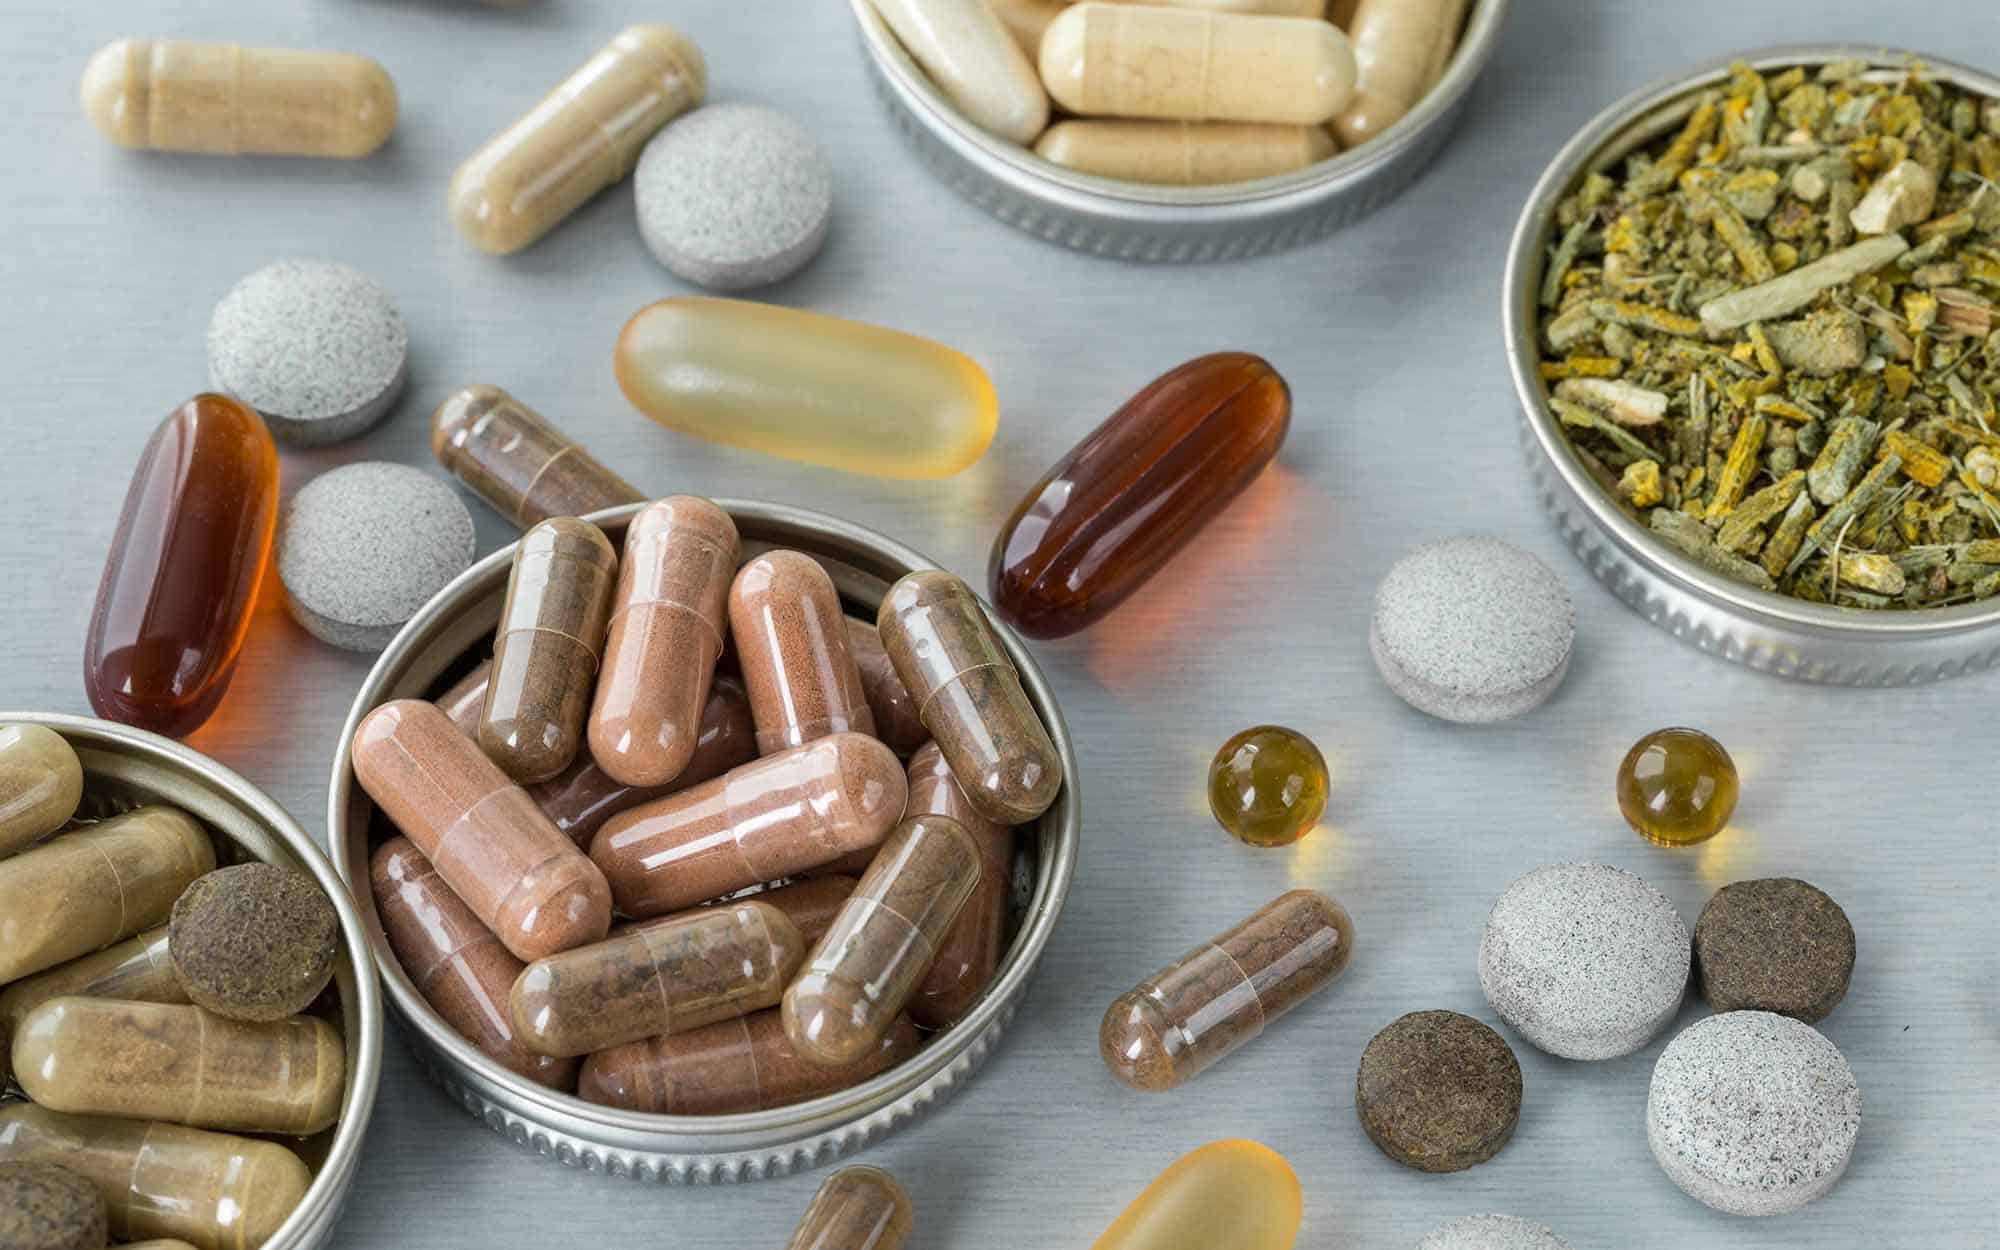 Supplement Packaging - Dietary and Nutraceuticals